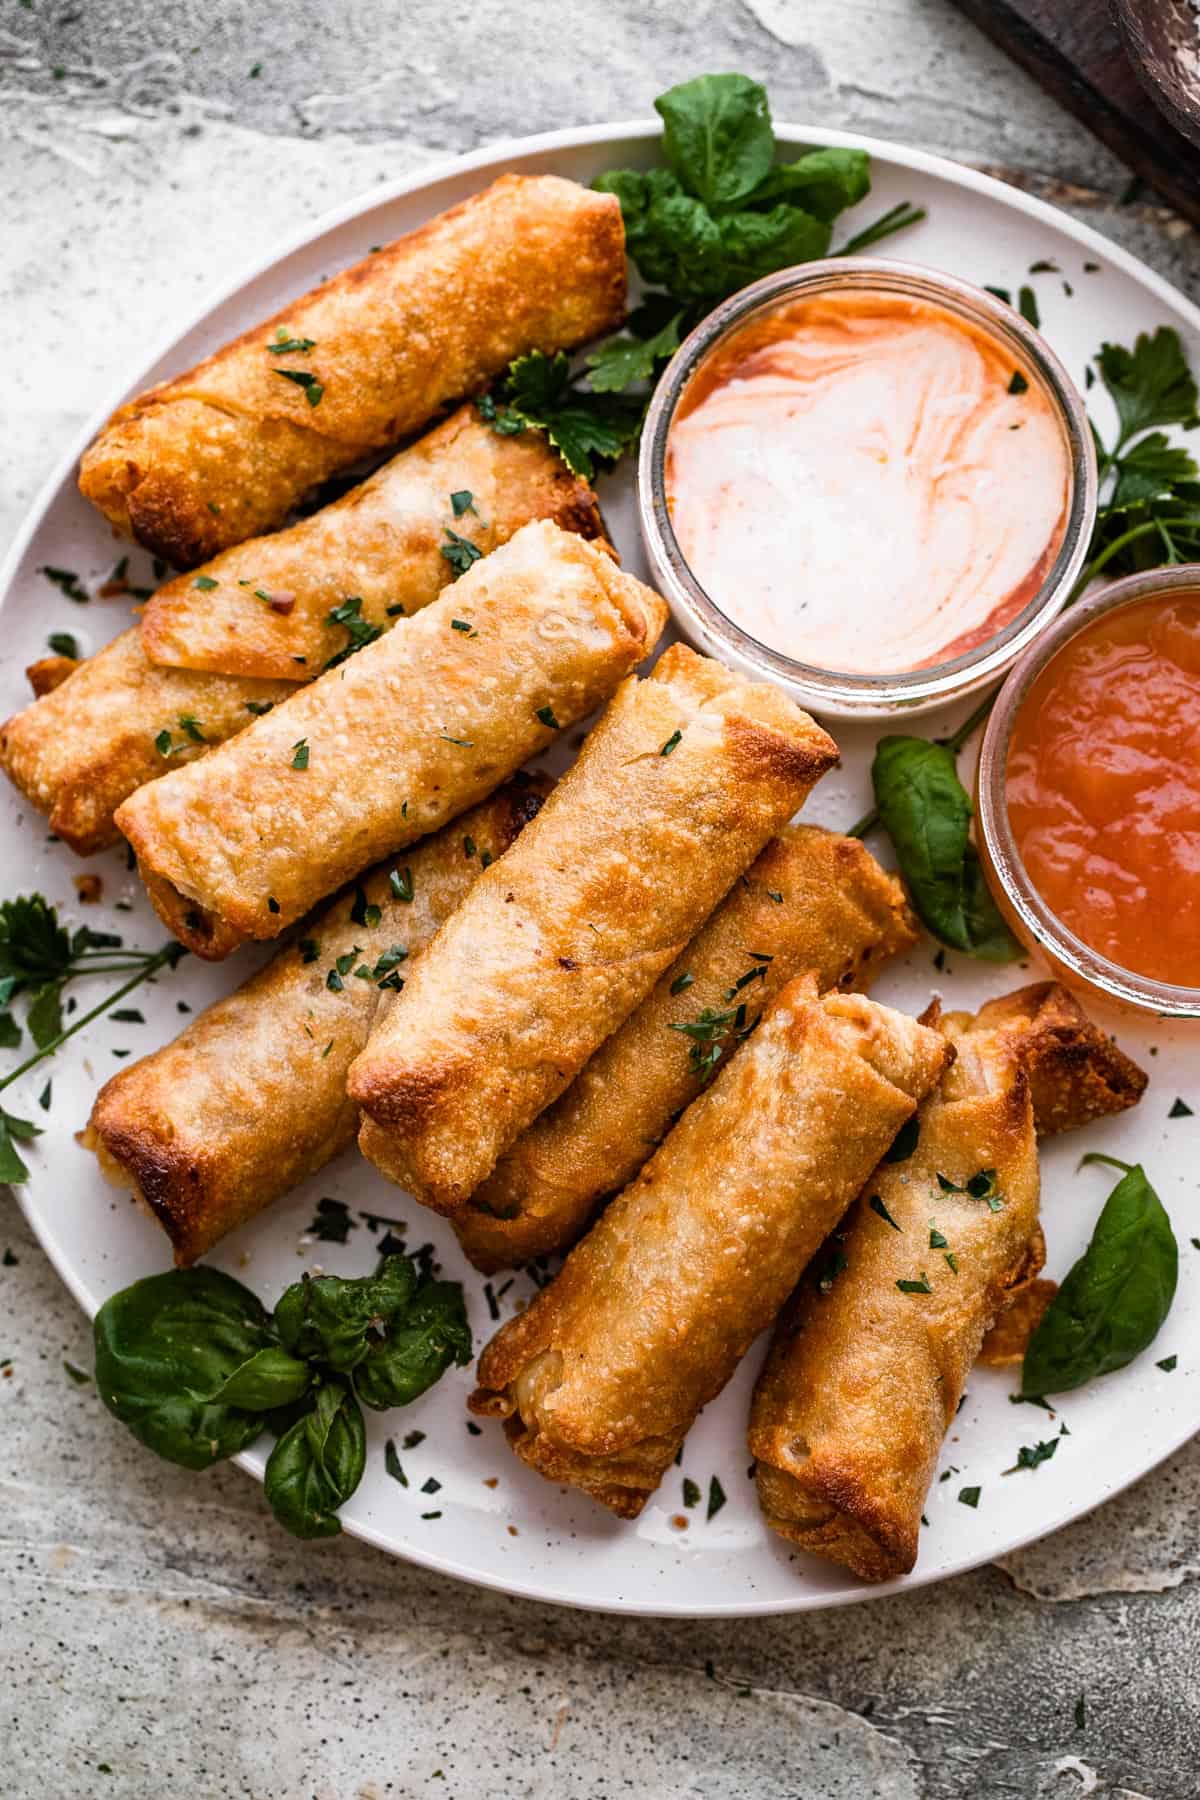 A plate of spring rolls with dipping sauce.